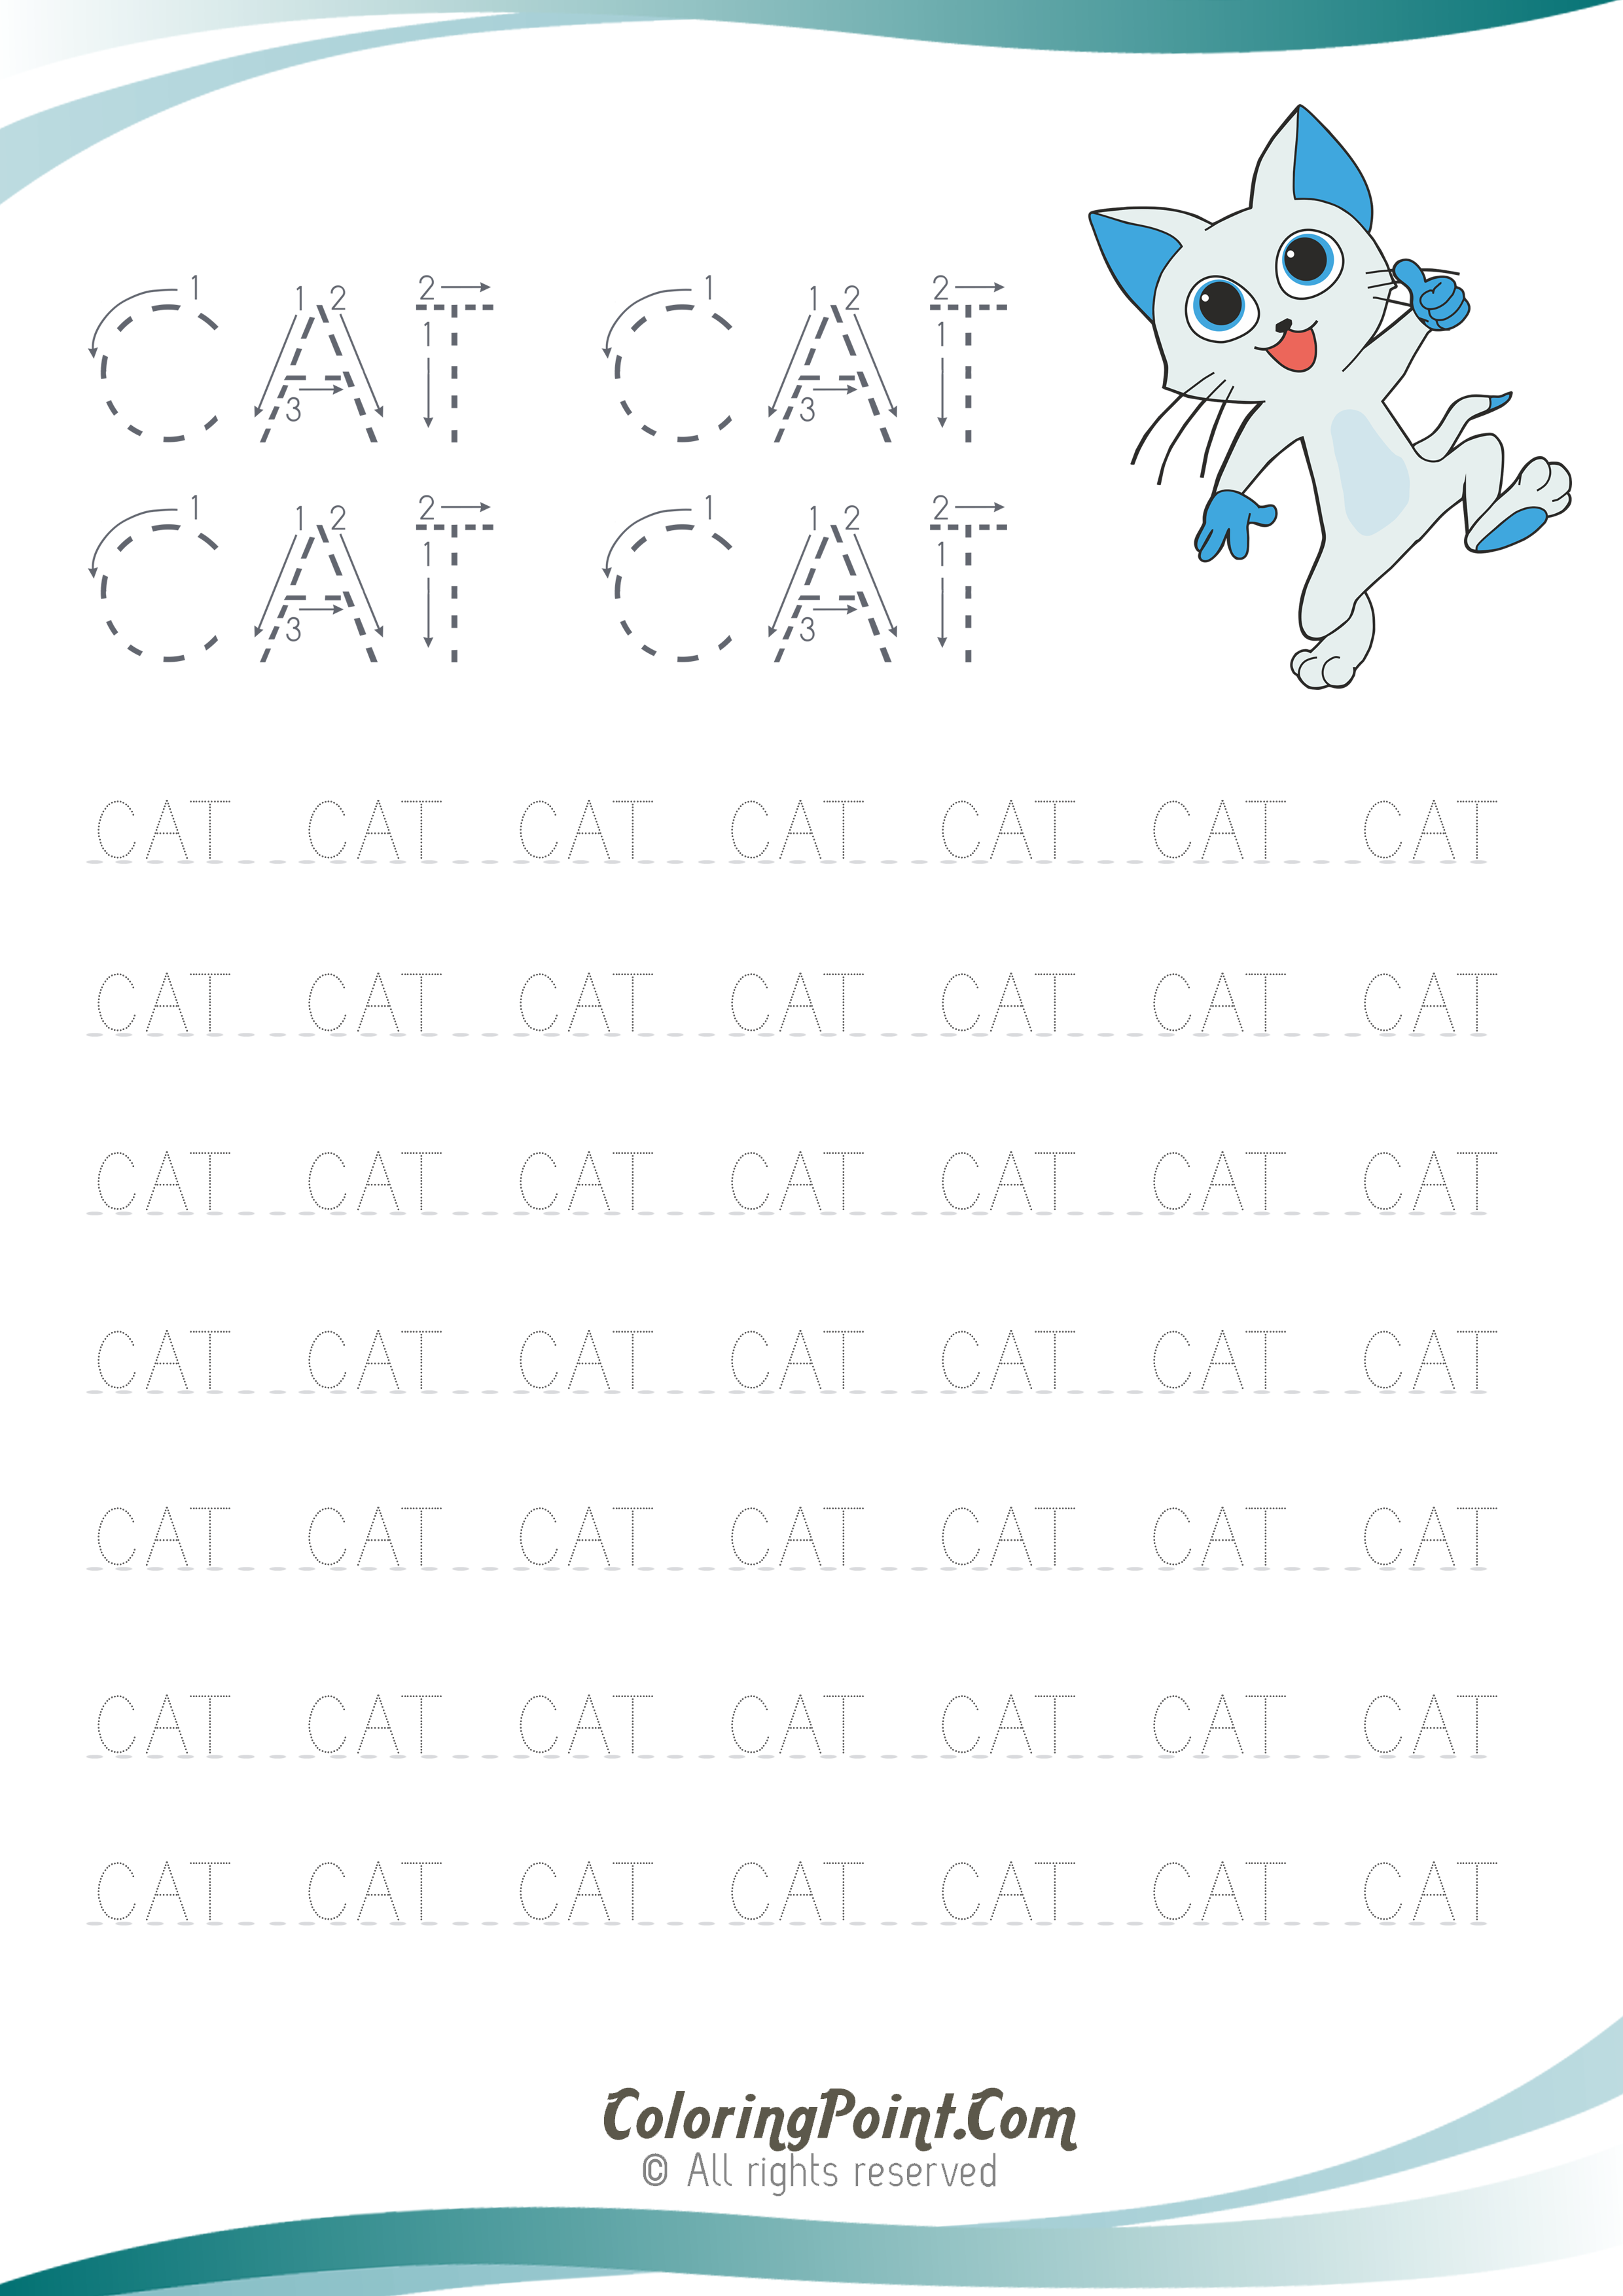 Printable Word Cat Tracing Worksheets - Coloring Point